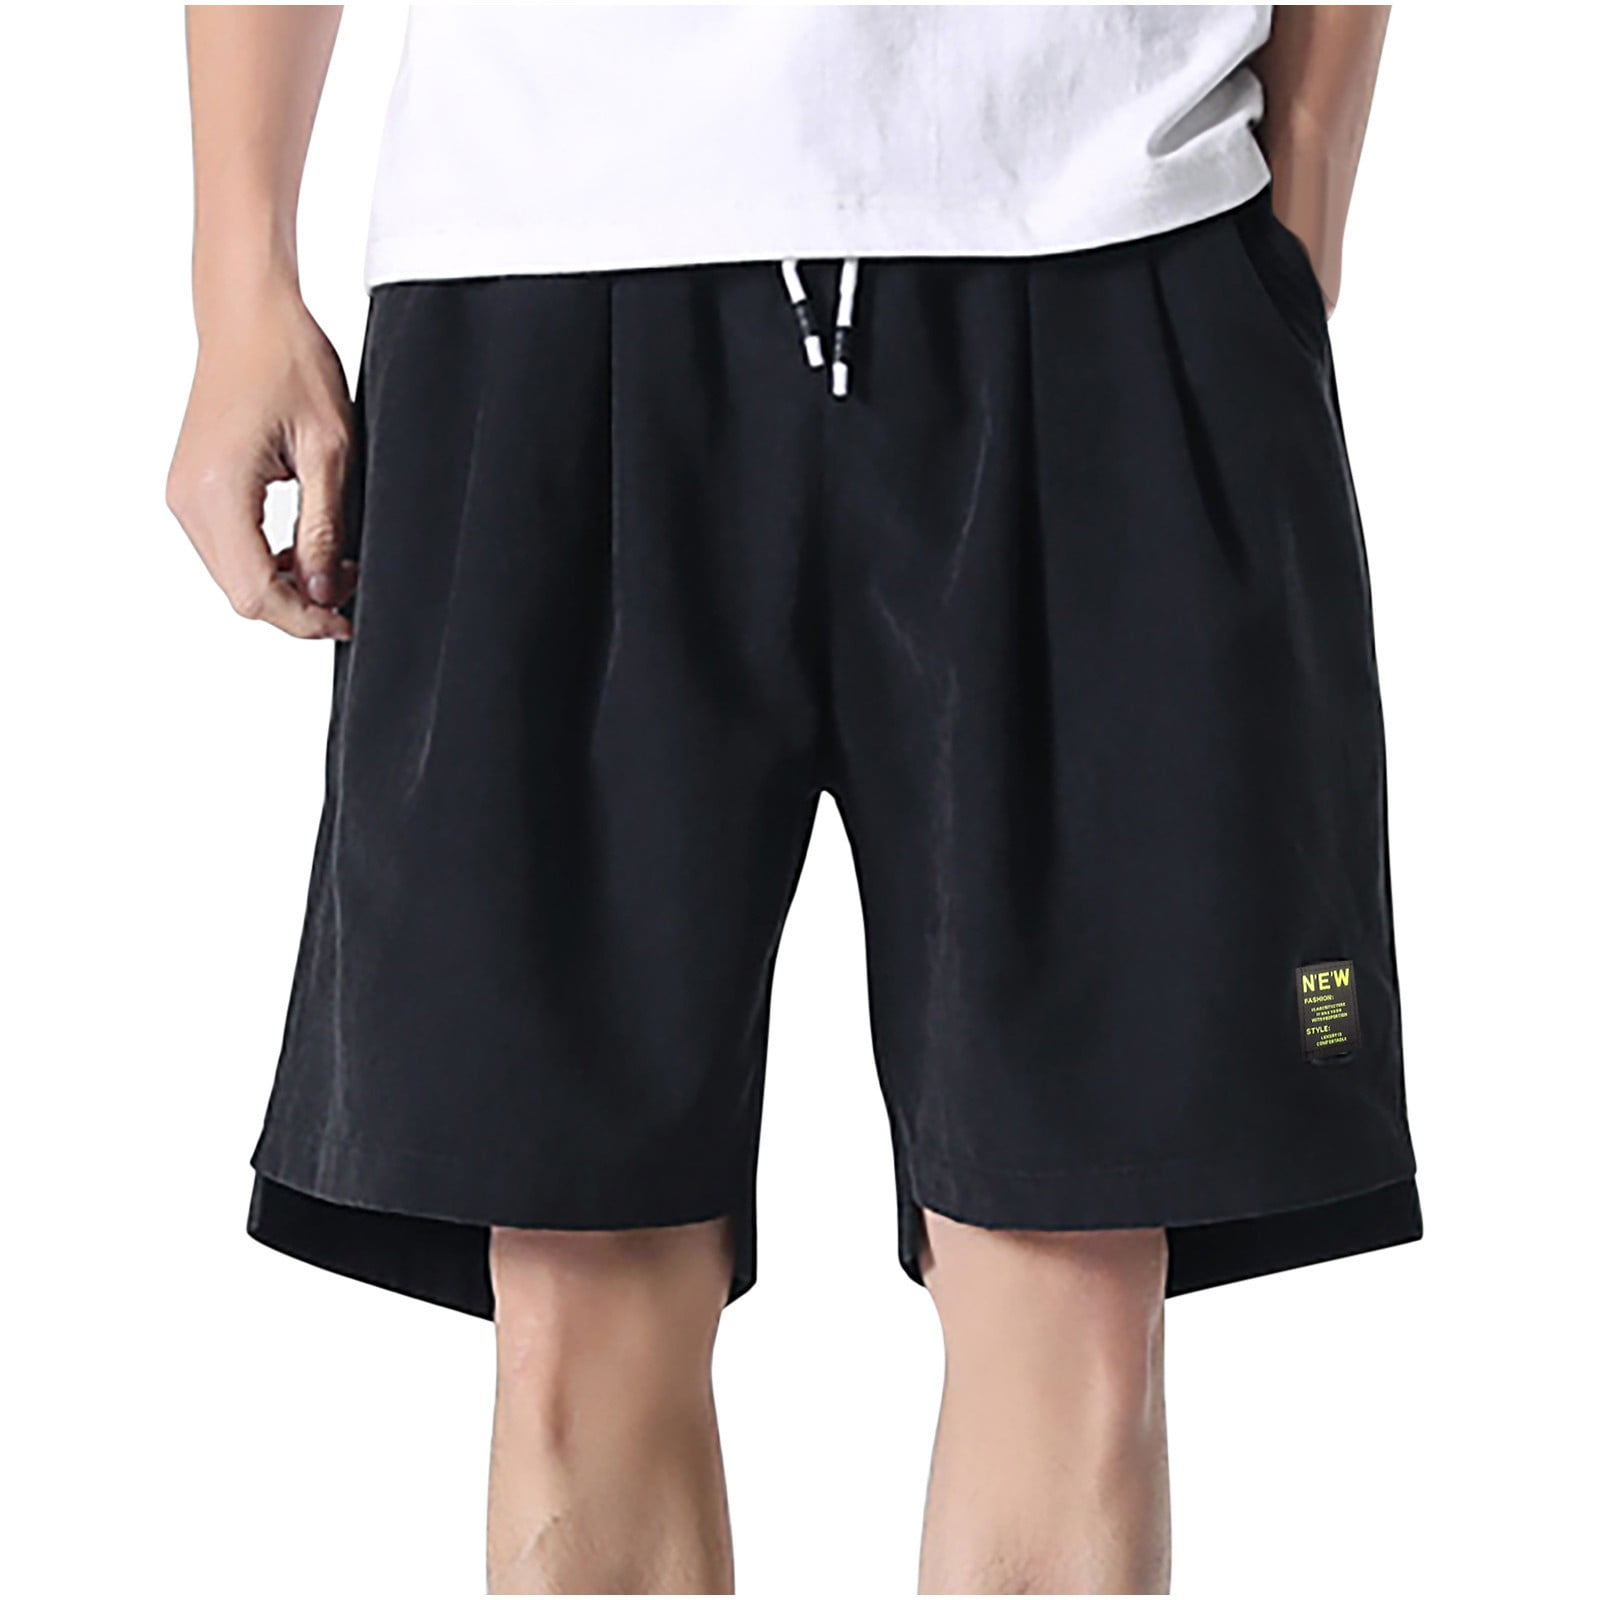 Embroidered Corduroy Half Pants For Men 2021 Fashion Casual Sport Mens  Corduroy Shorts For Fitness, Walking, And Workouts H1210 From Mengyang04,  $13.93 | DHgate.Com